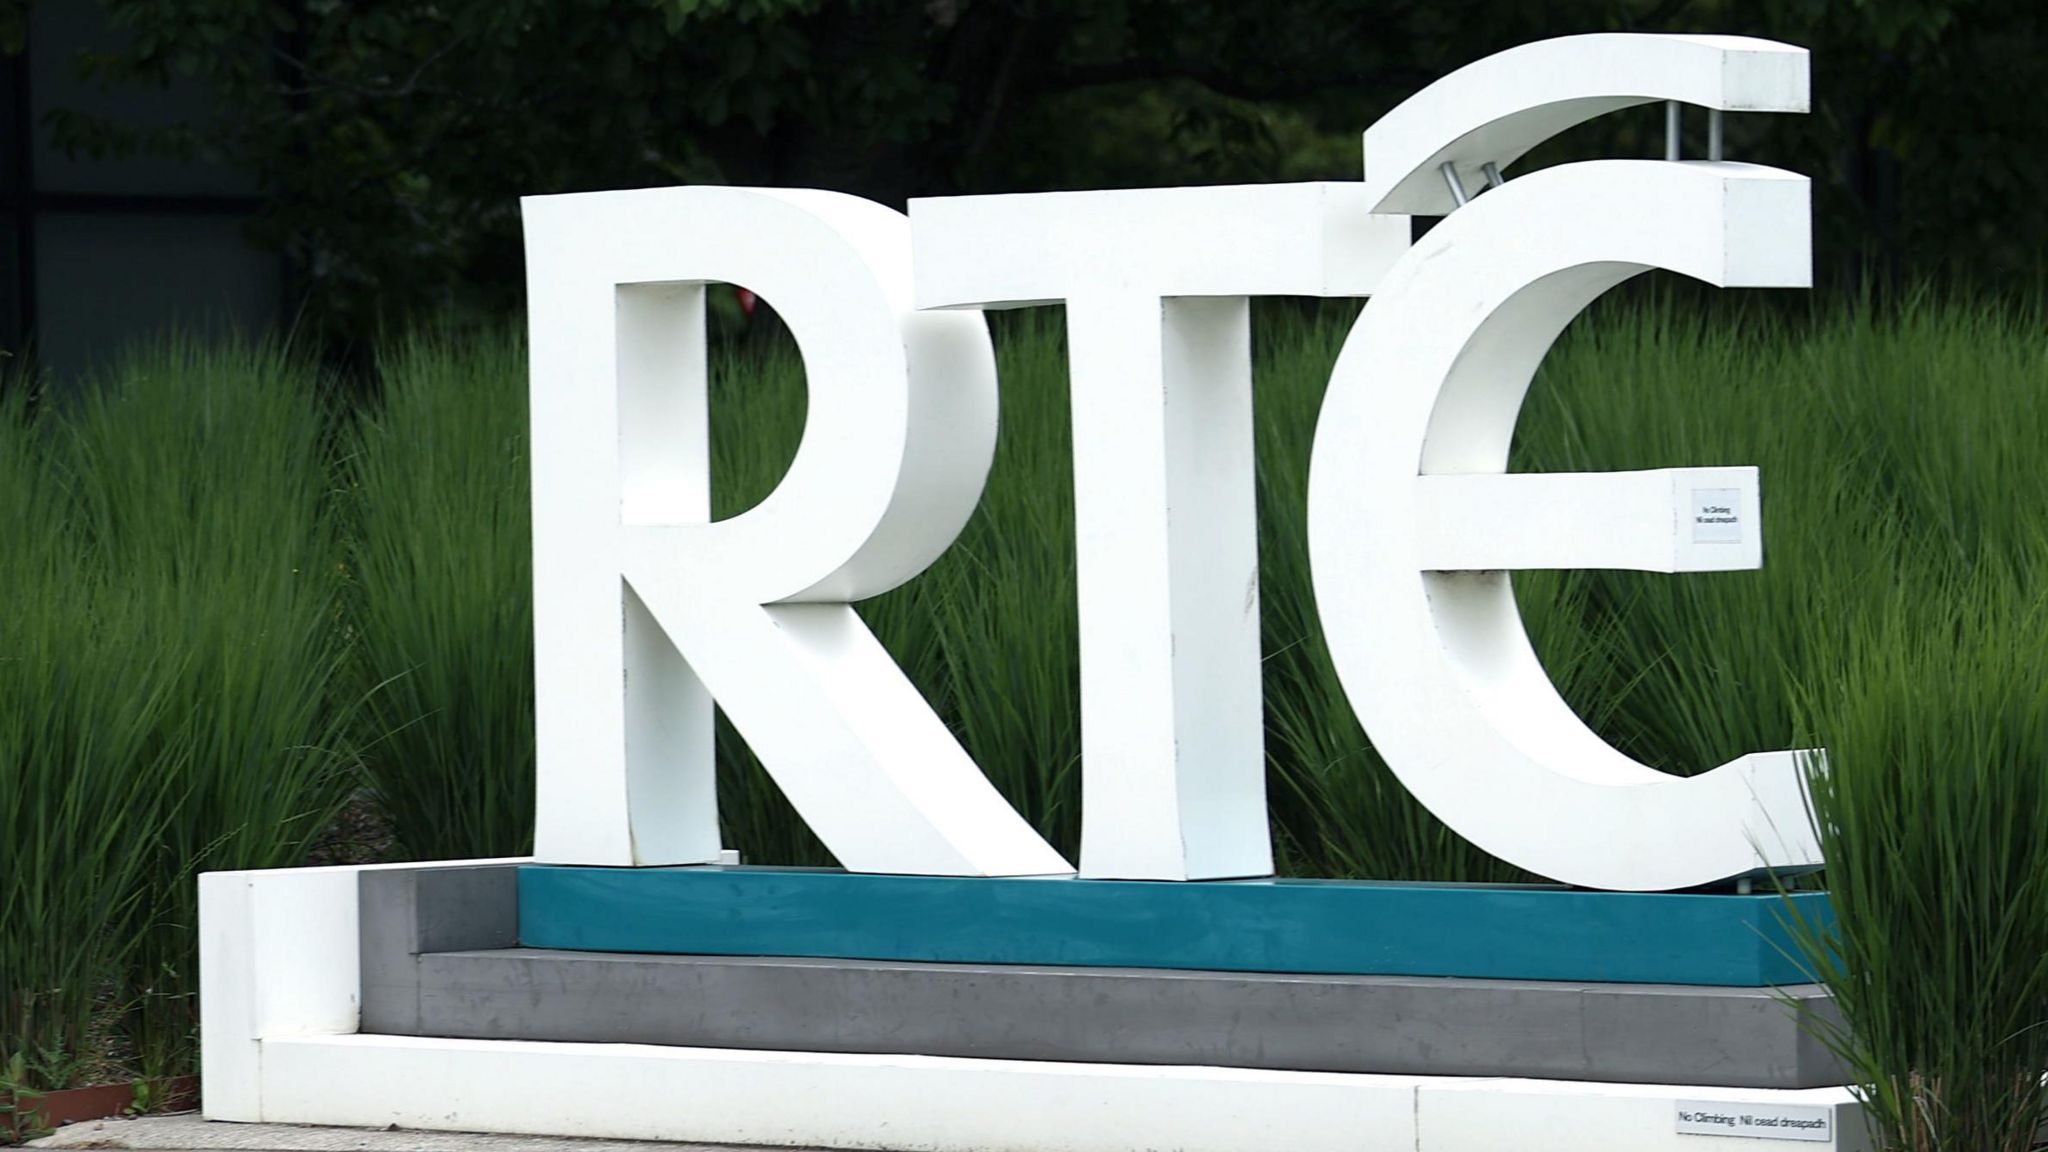 RTE scandal: The murky world of slush funds and barter accounts